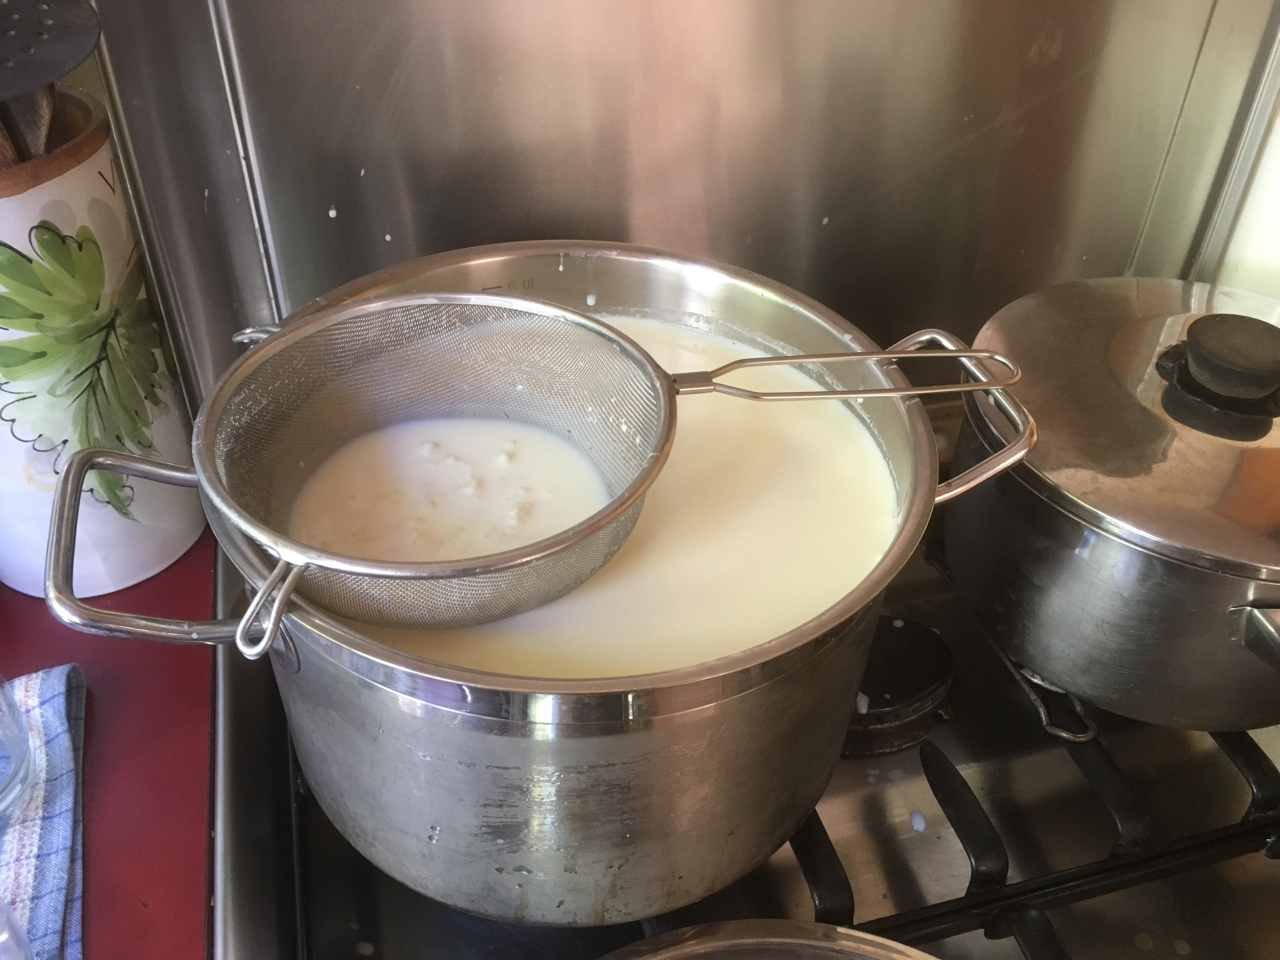 Kefir grains being used to culture milk in preparation for making cheese. The grains are submerged in the milk but being held at the surface by a hemispherical metal sieve.